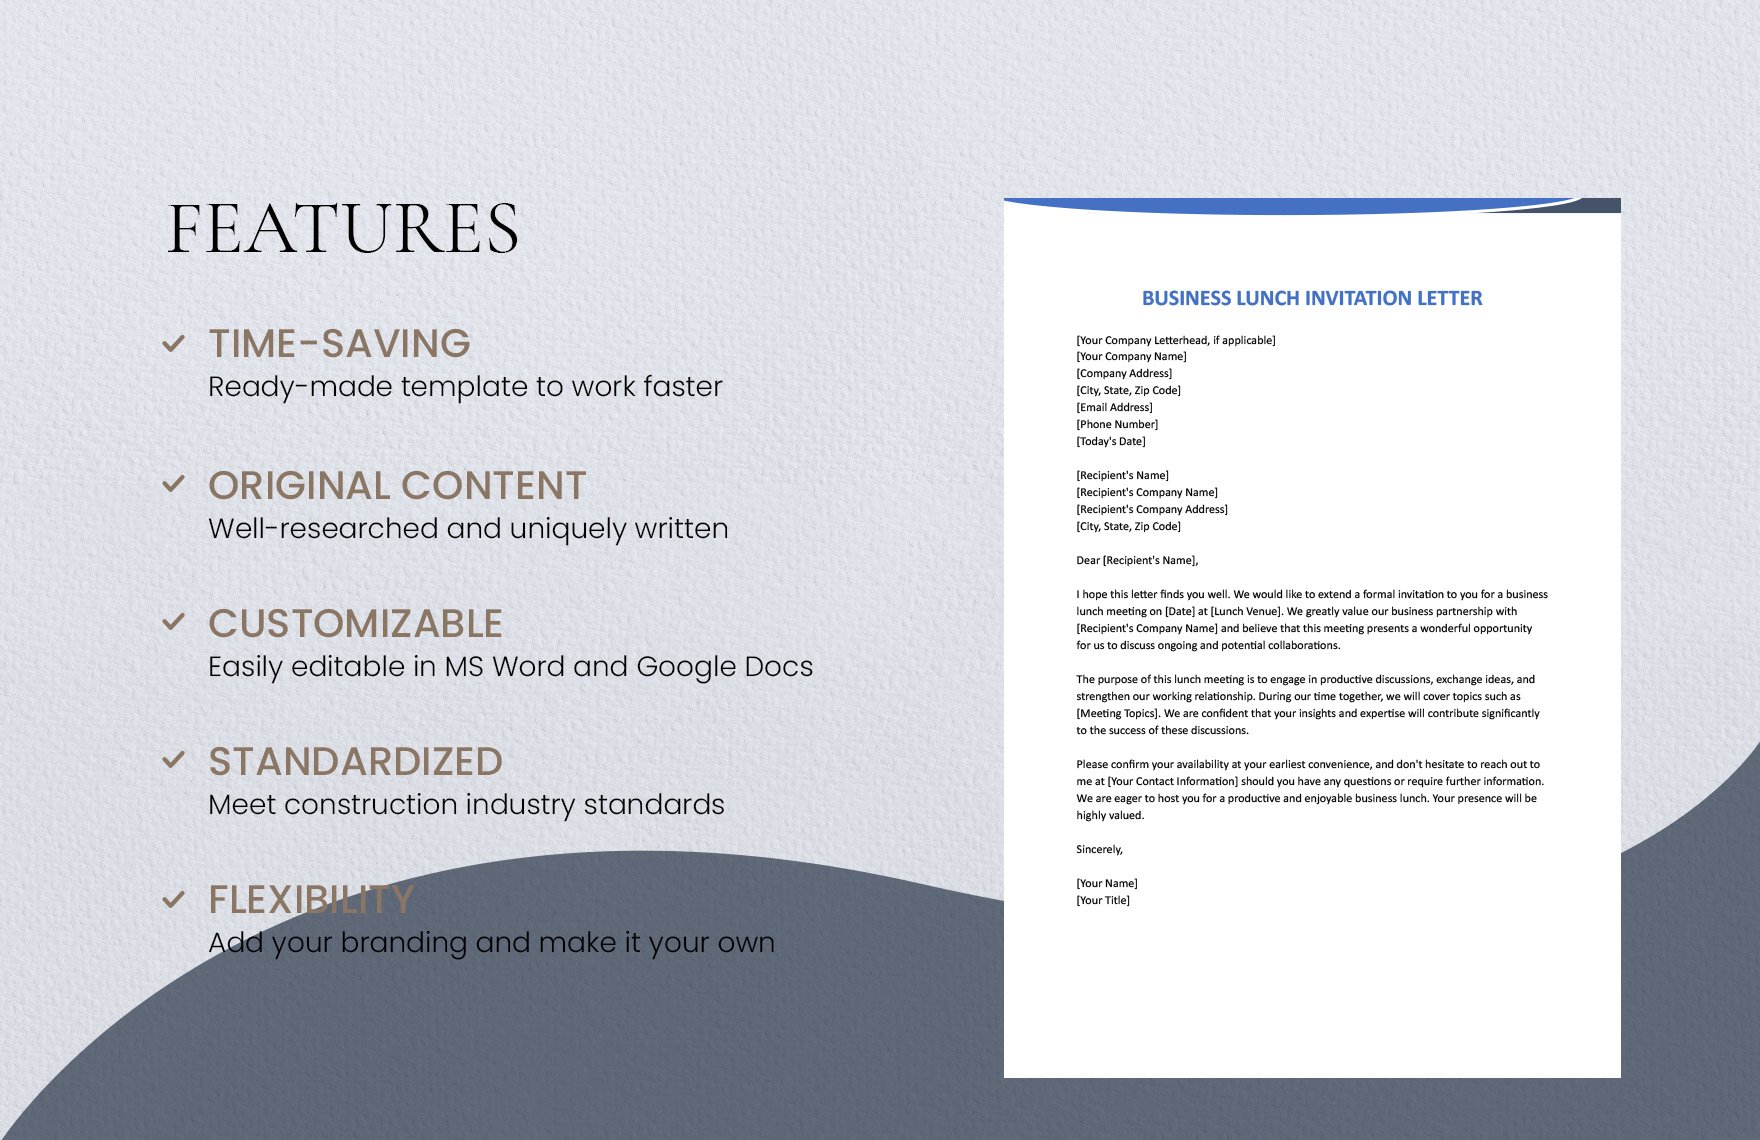 Business Lunch Invitation Letter